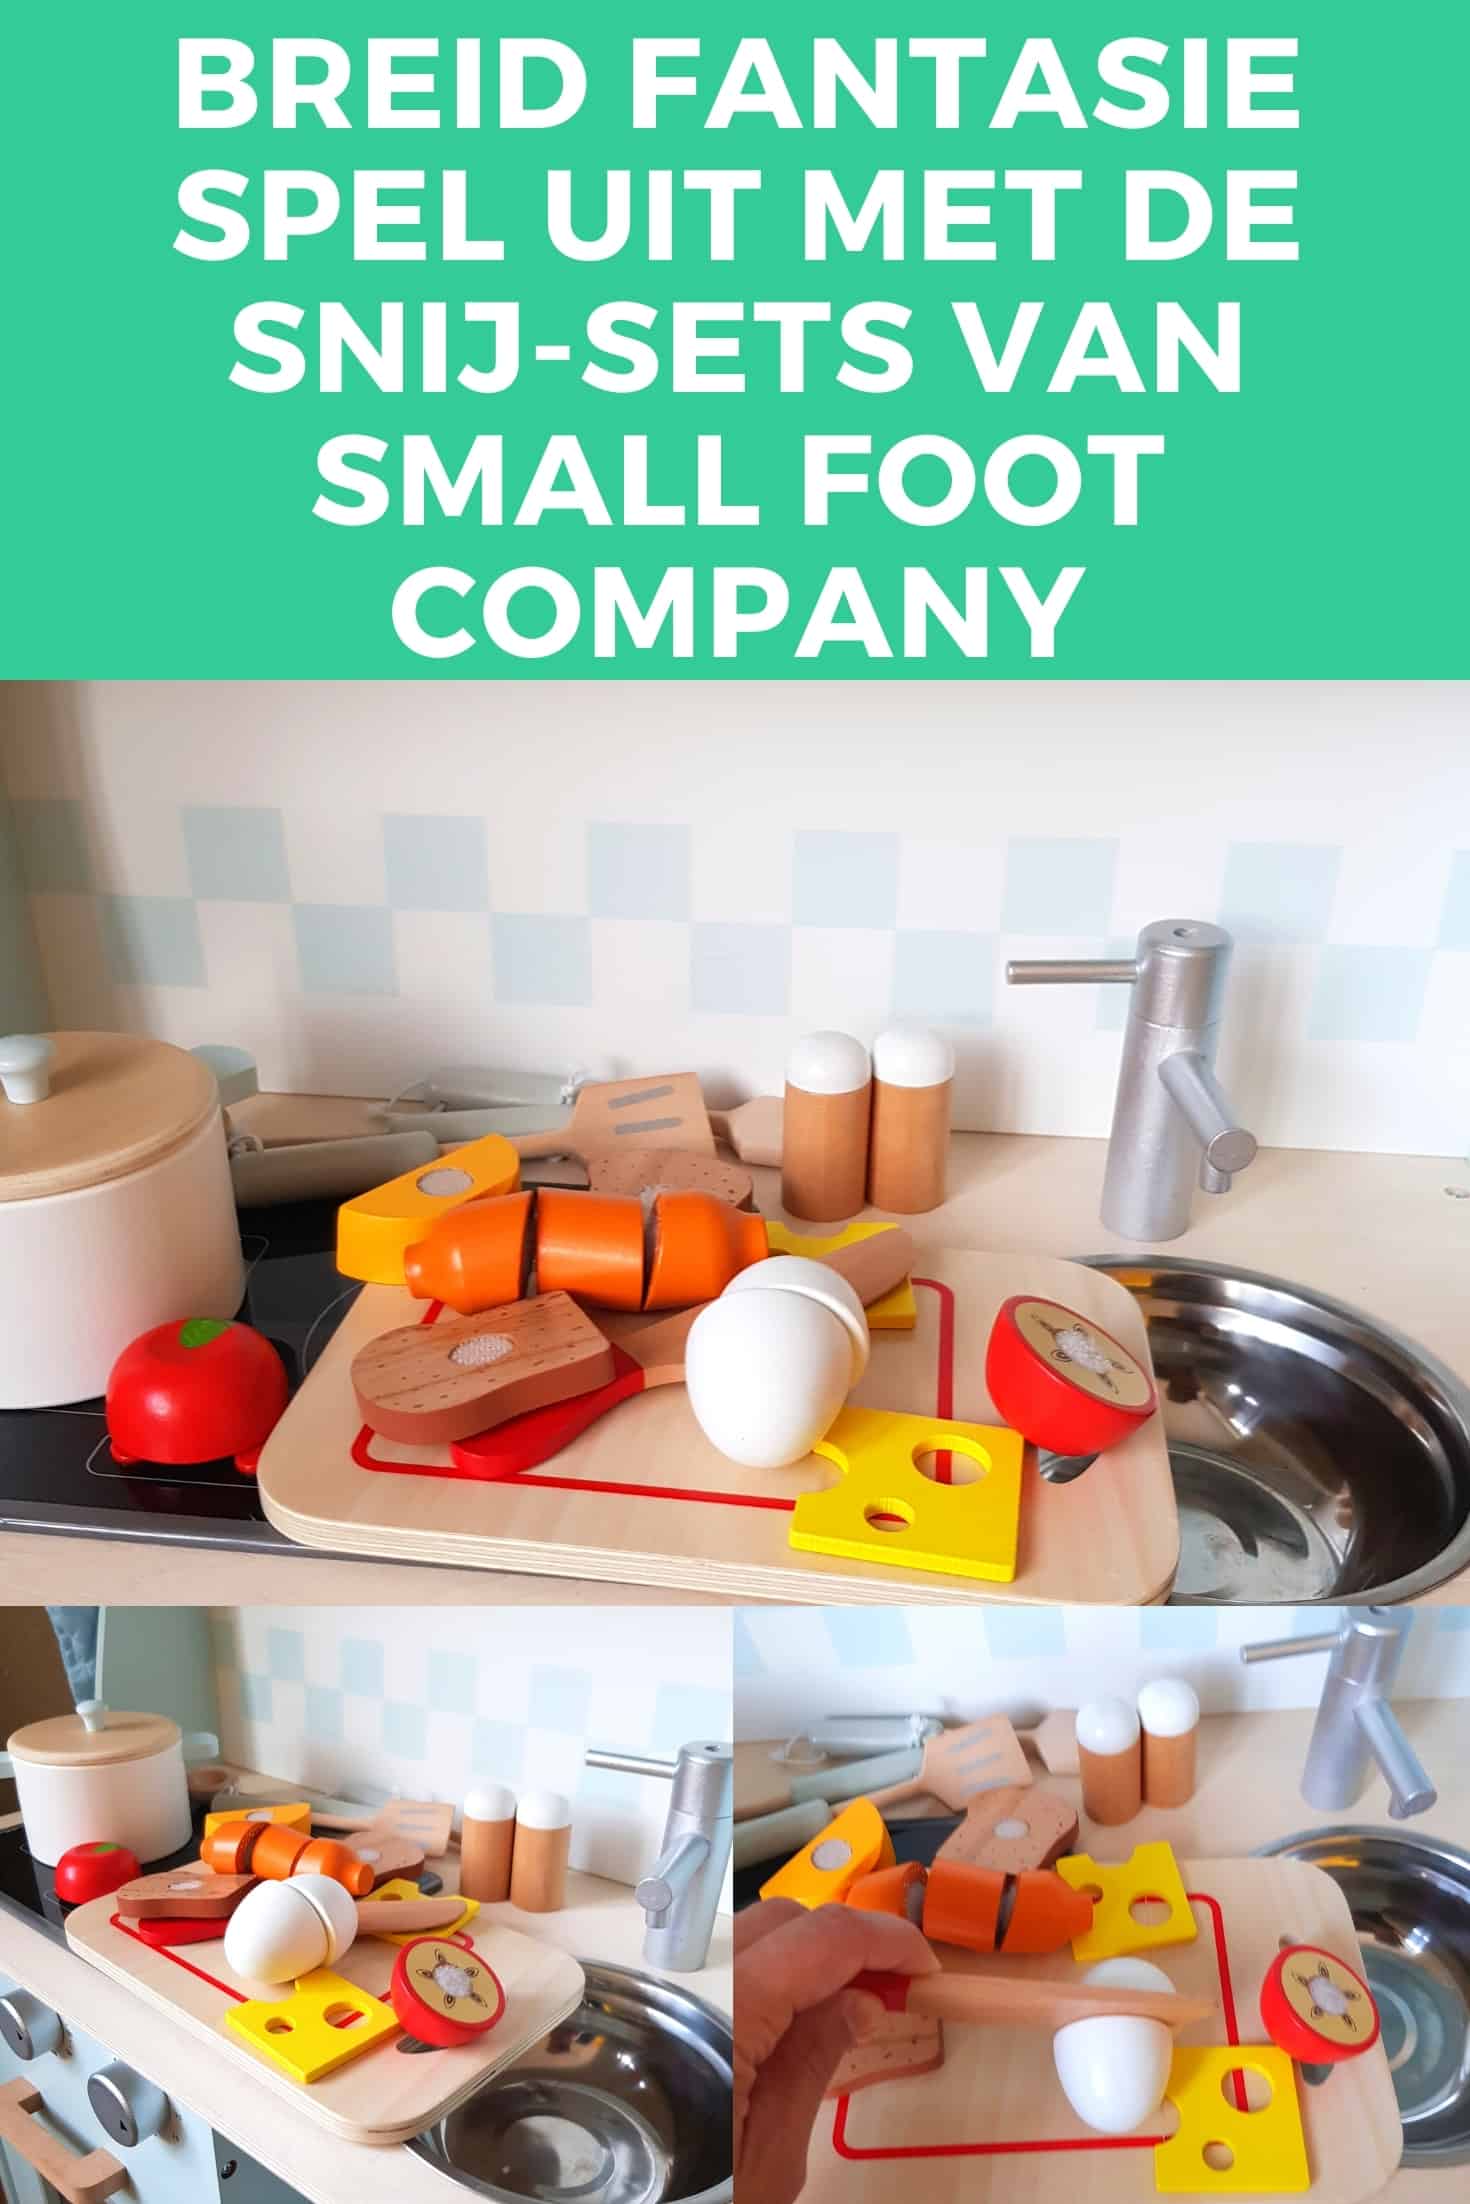 Expand your fantasy play with the small foot company cutting sets